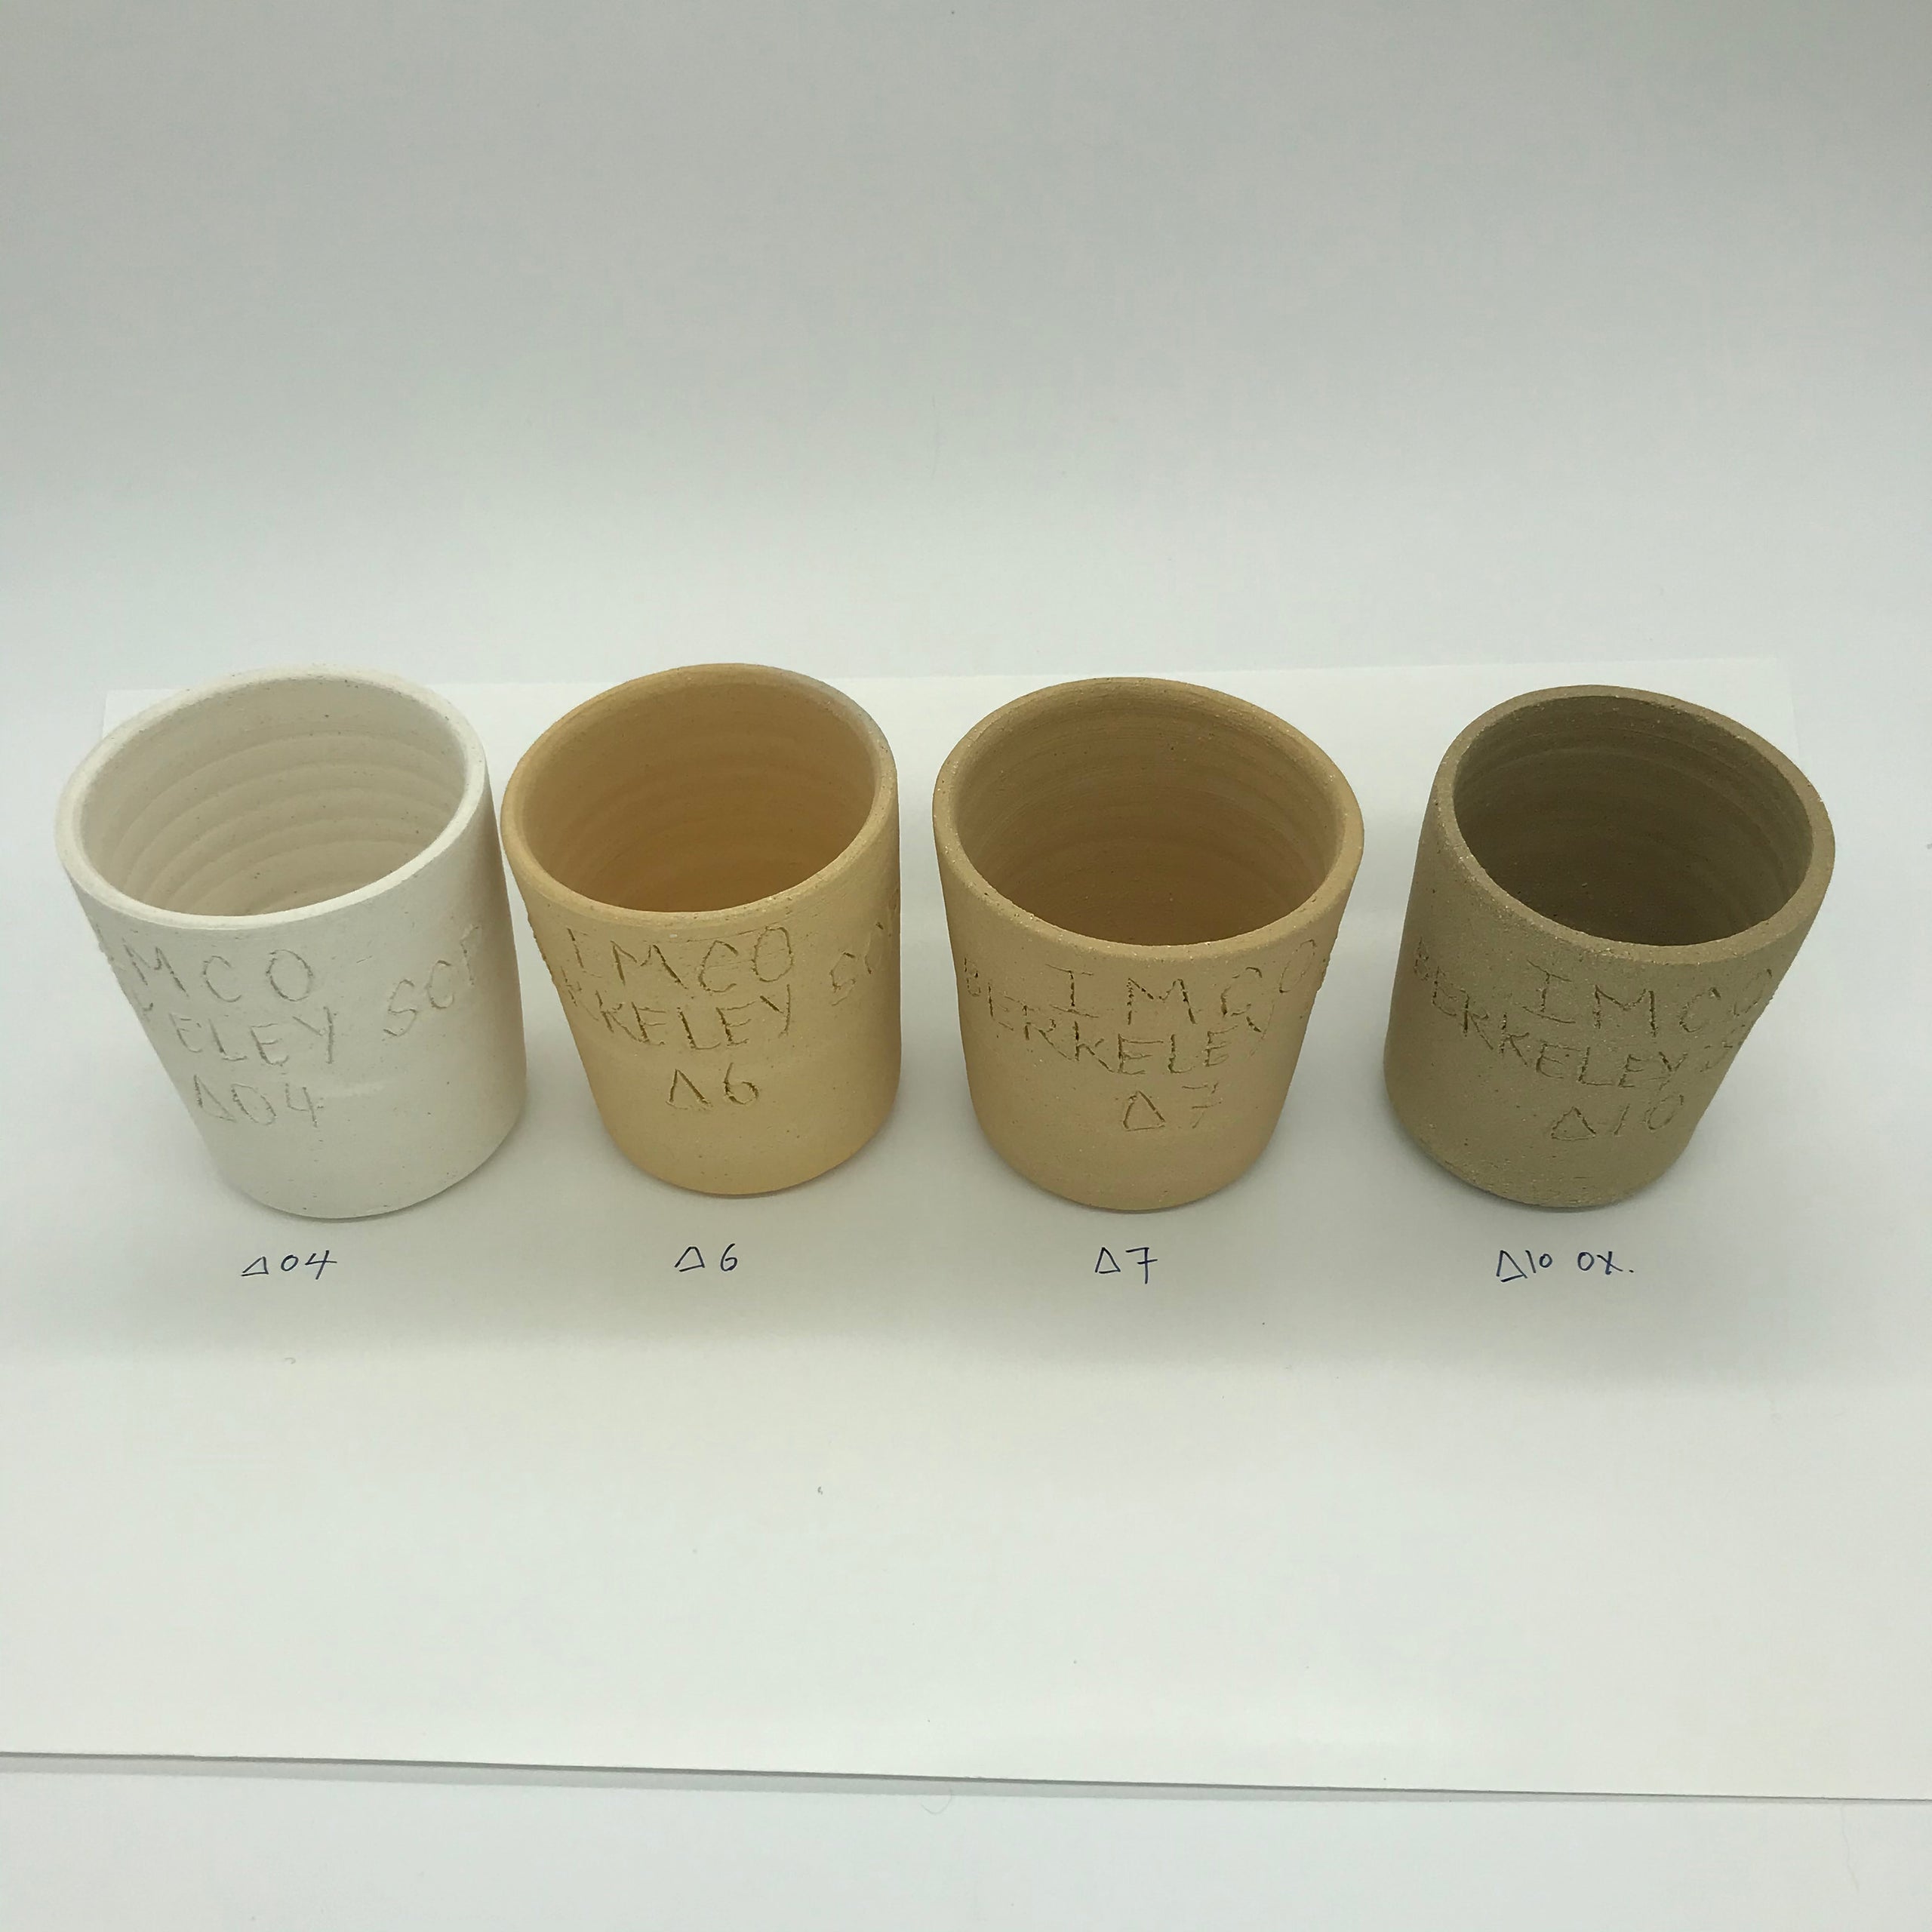 130 Porcelain Clay – Standard Clay Company